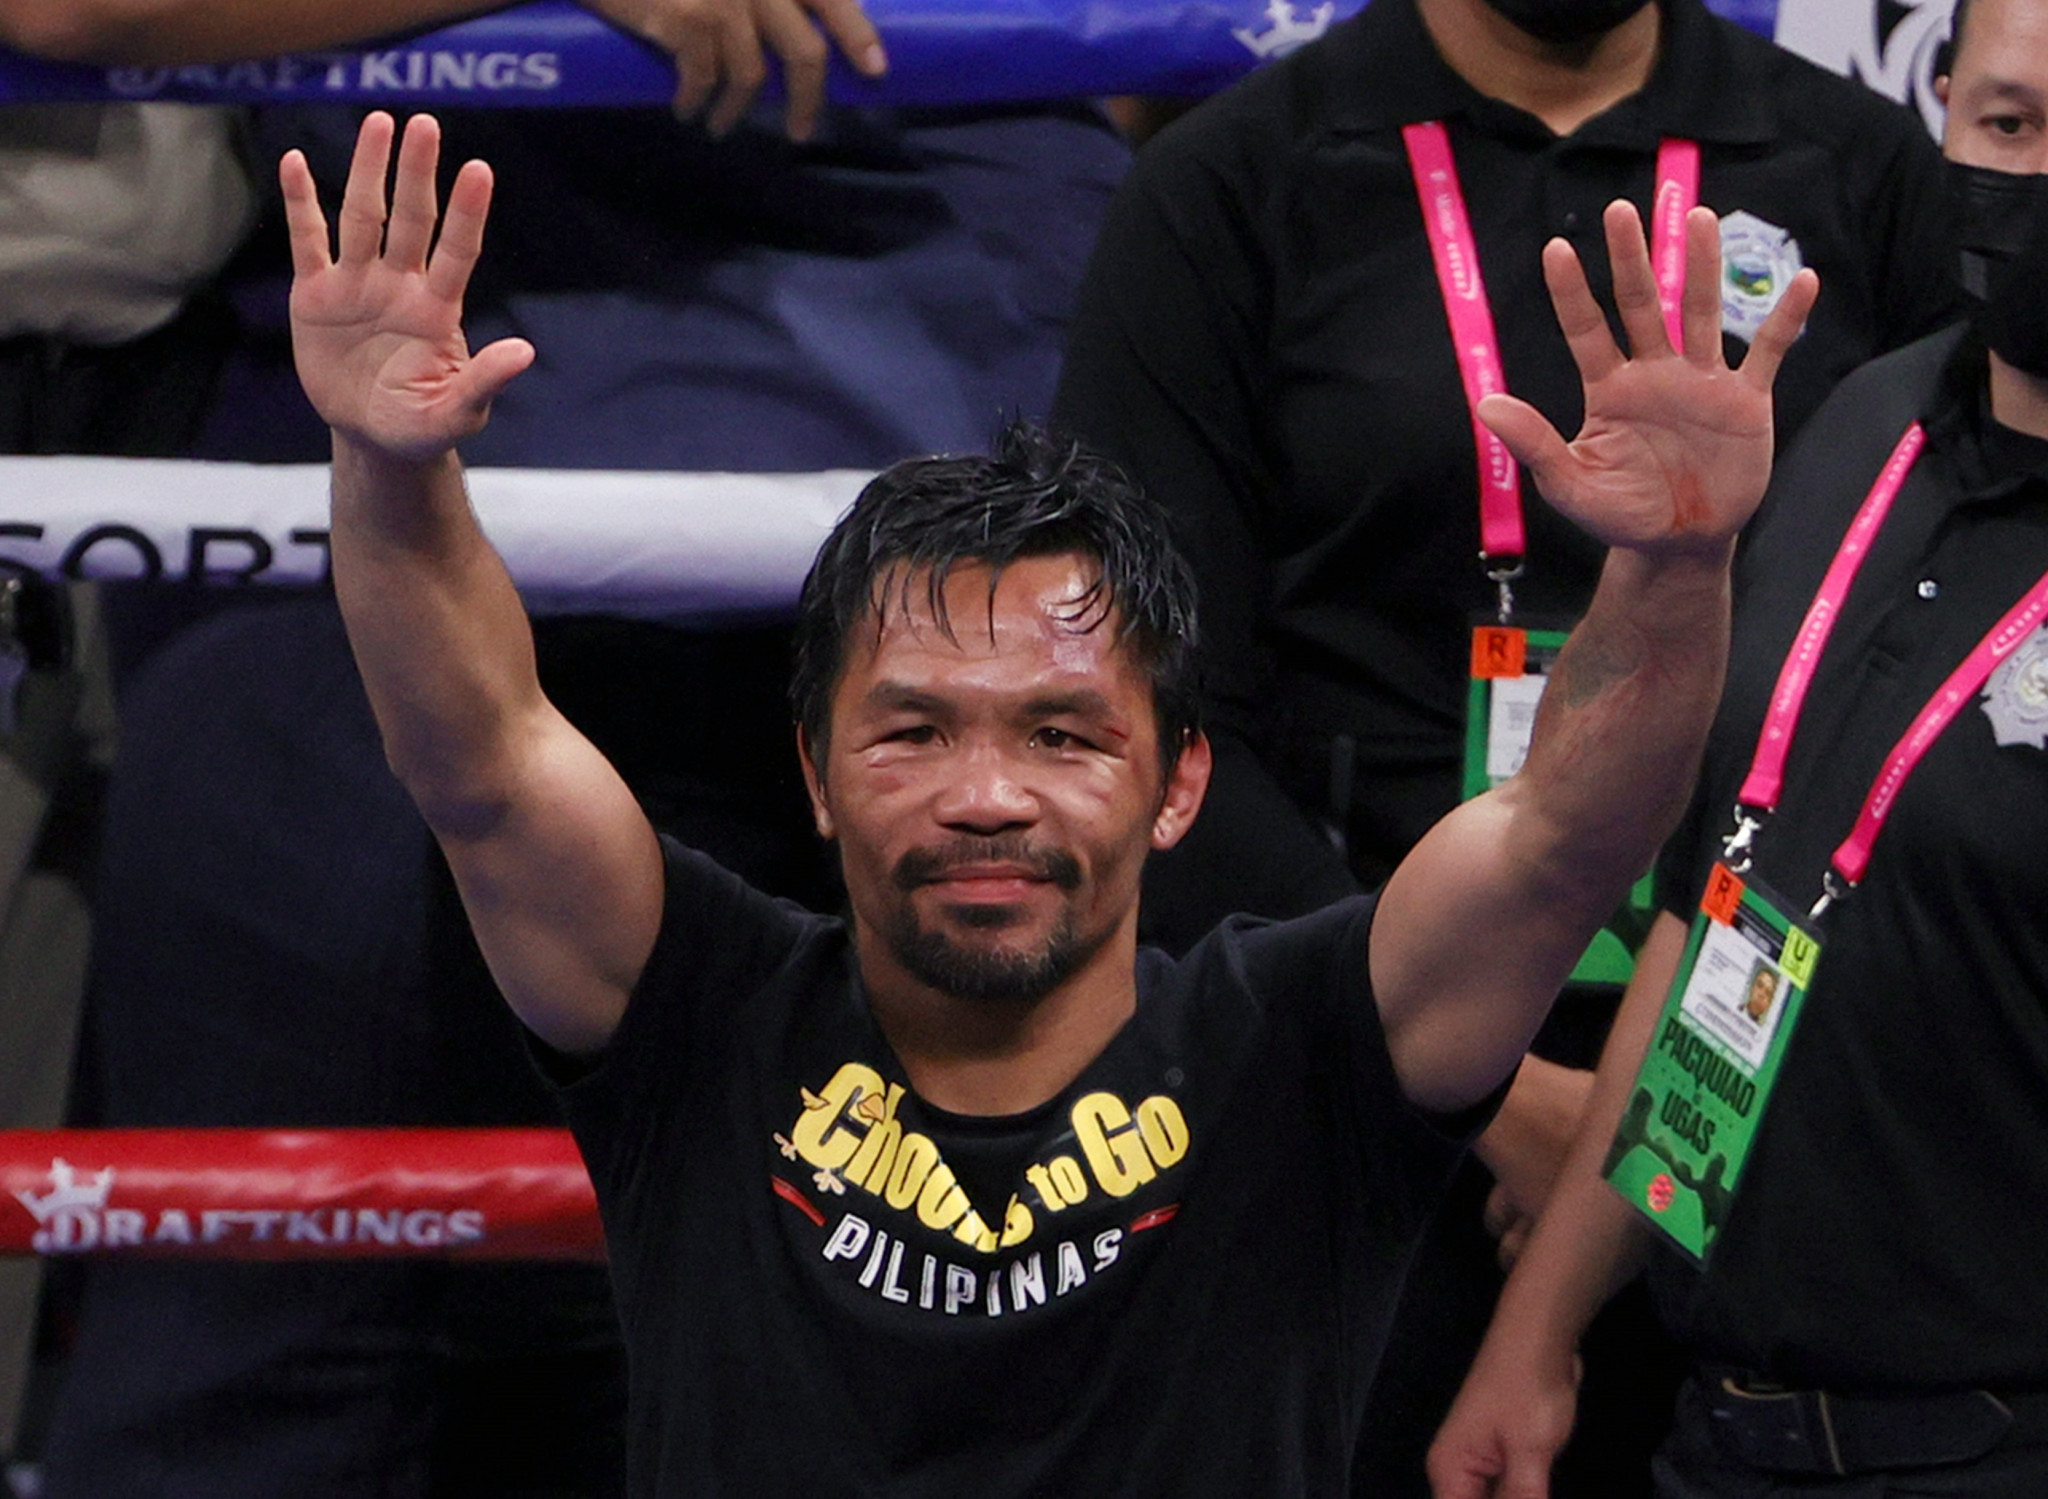 Boxing great Pacquiao launches gaming brand in bid to "conquer the world of esports"